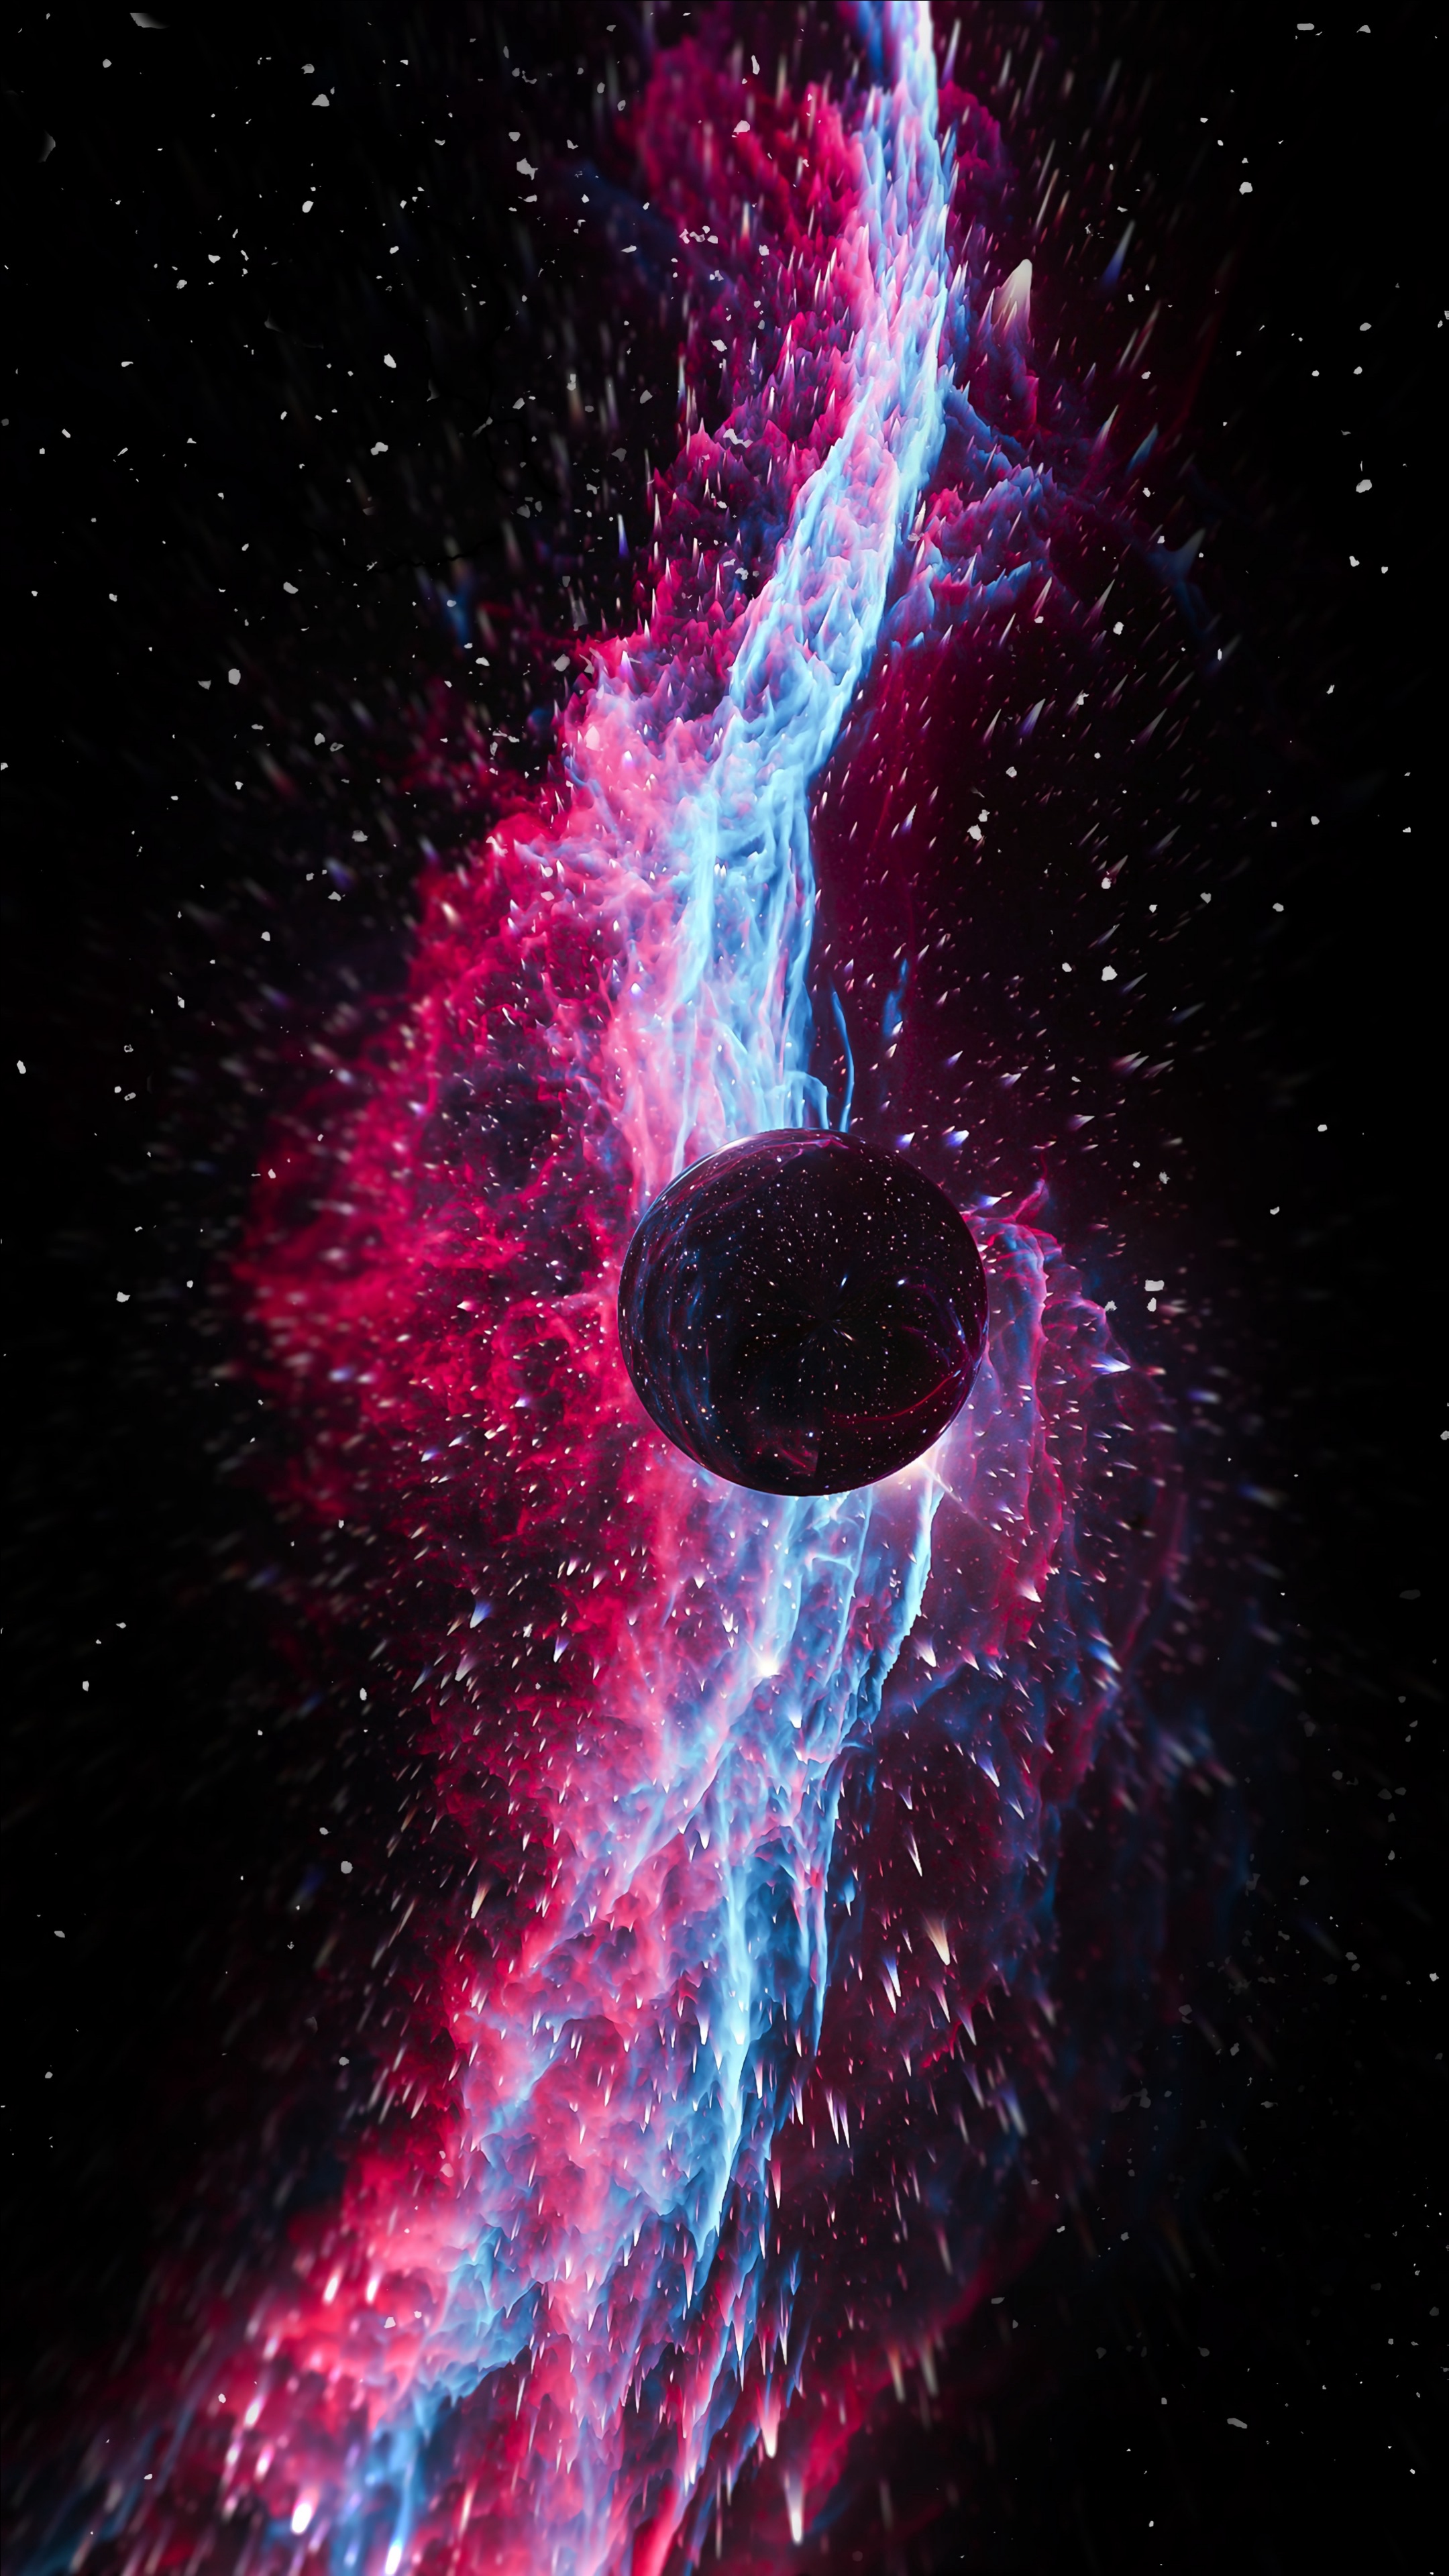 3d, ball, bright, flight, cosmic explosion, space explosion wallpaper for mobile